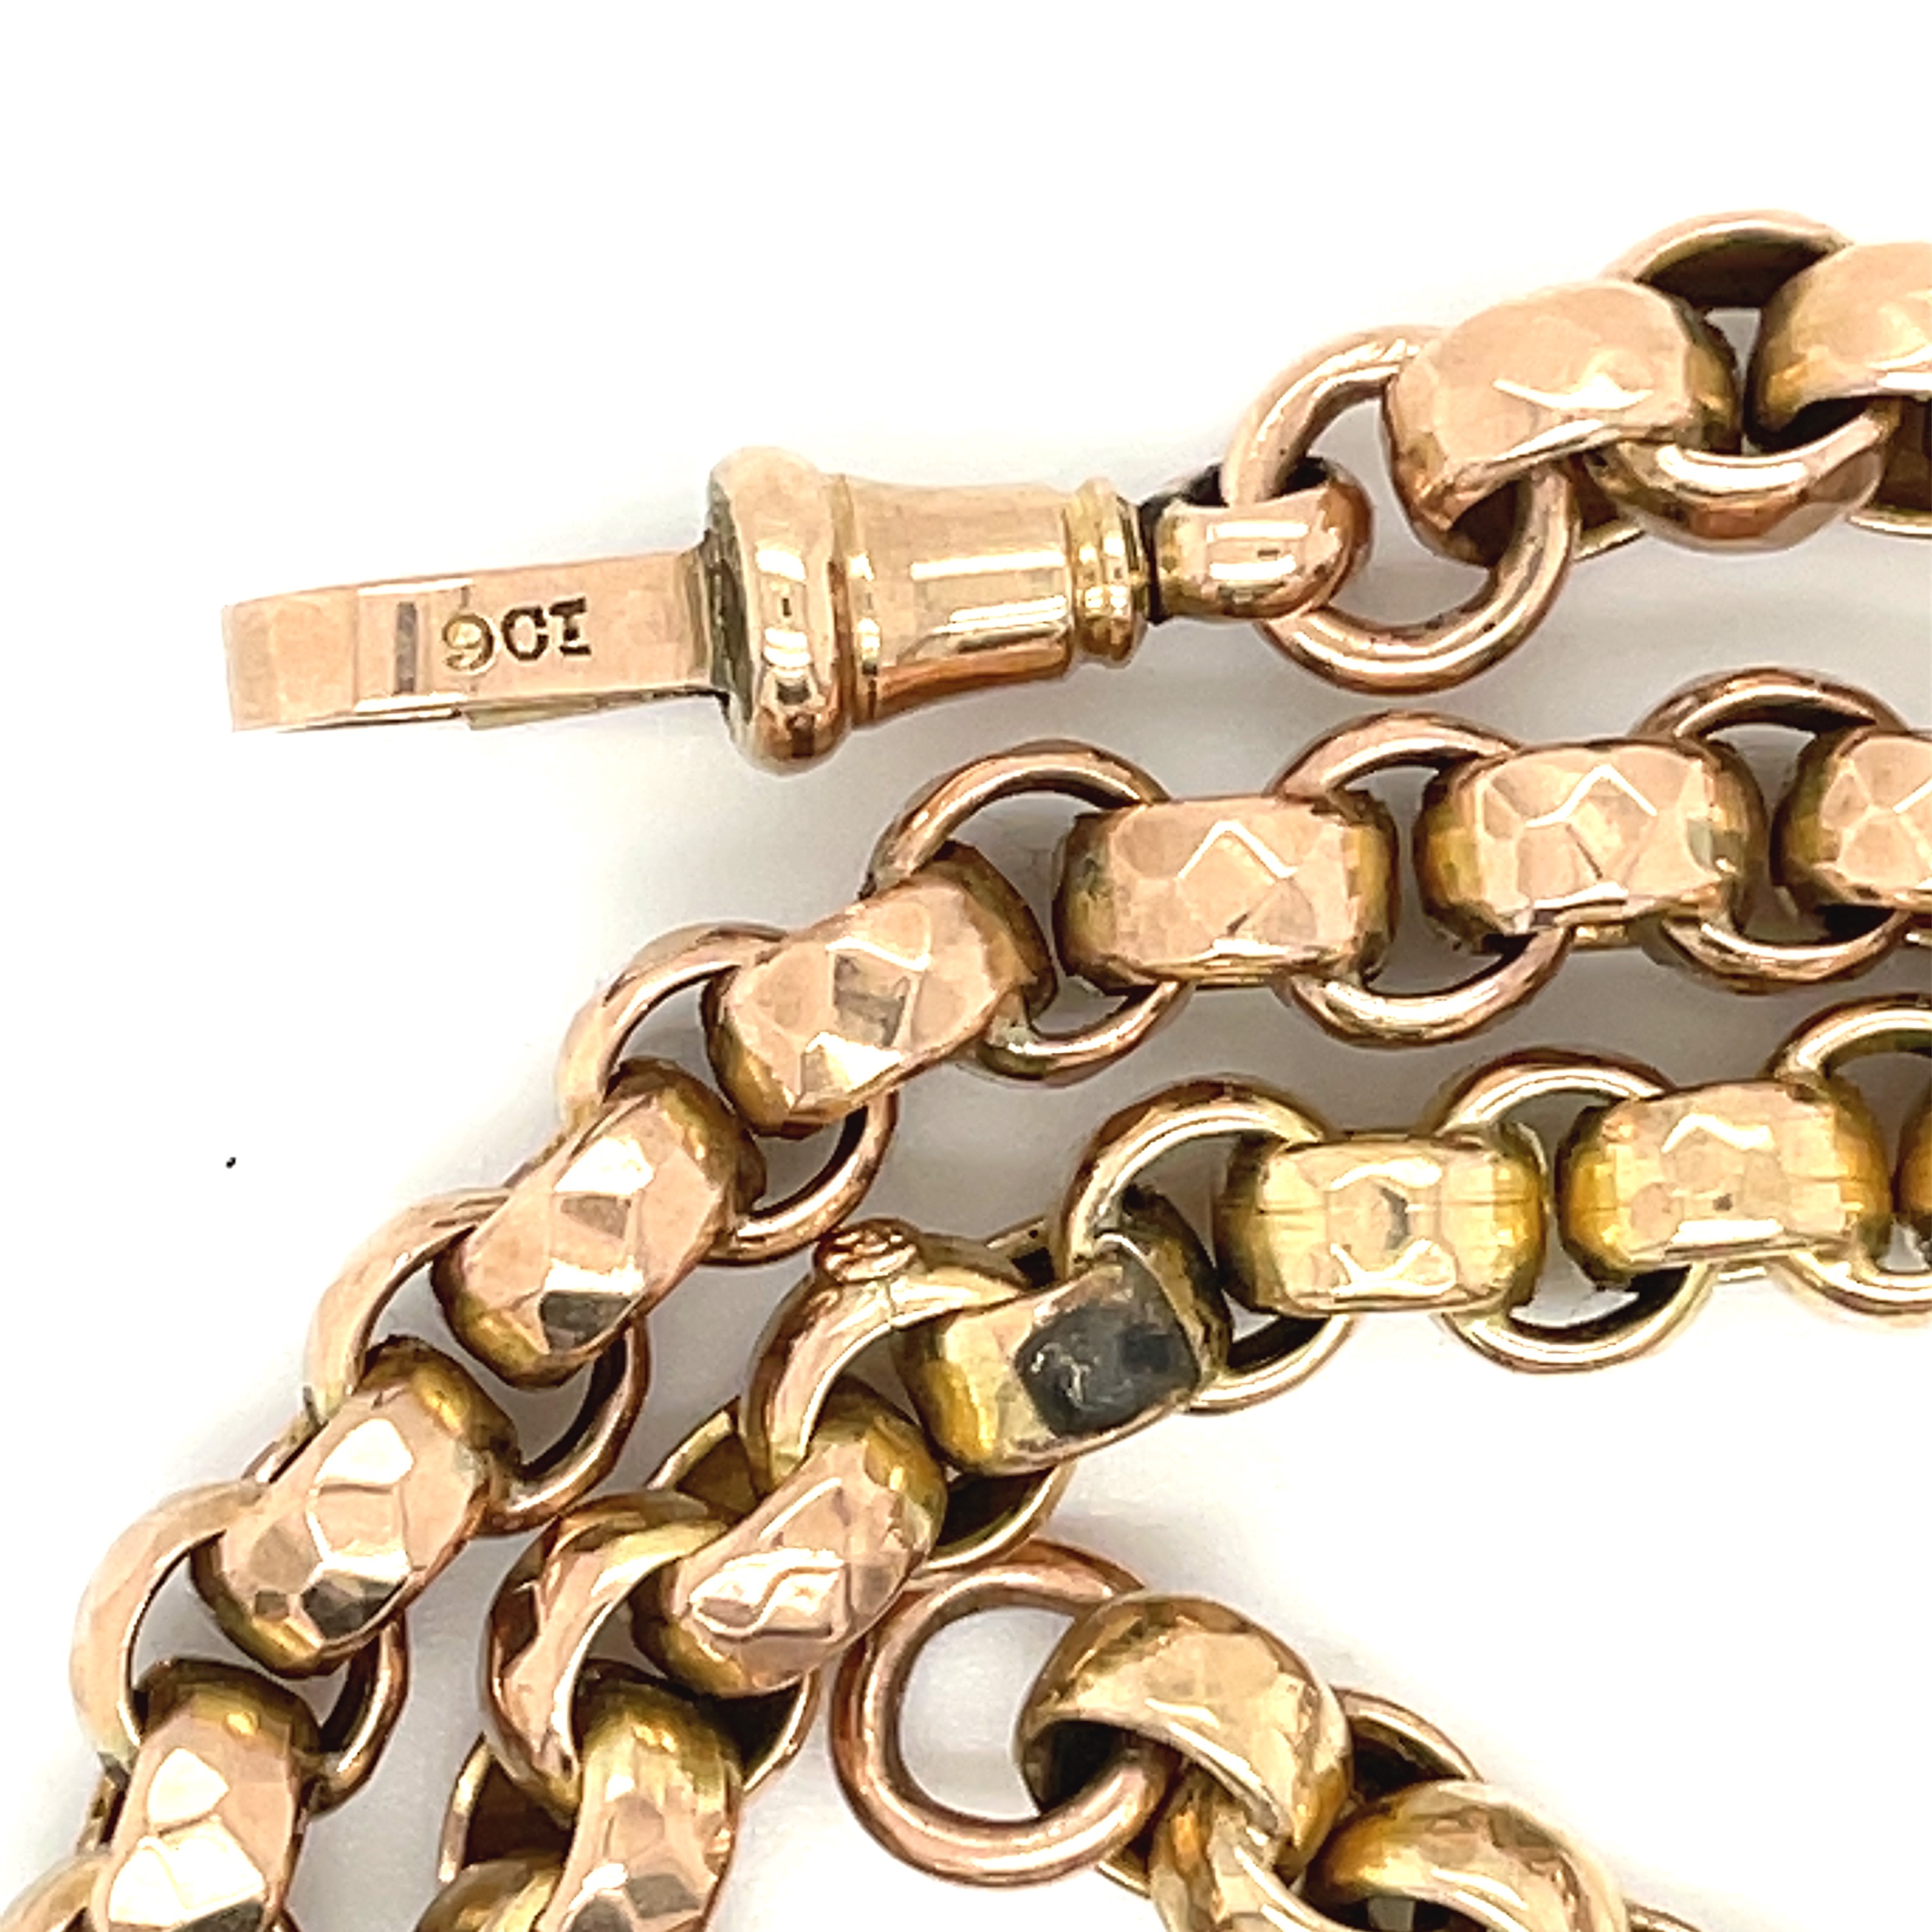 Antique 9ct Gold Watch Chain - 43.5cm long and weighing 28 grams. - Image 4 of 5